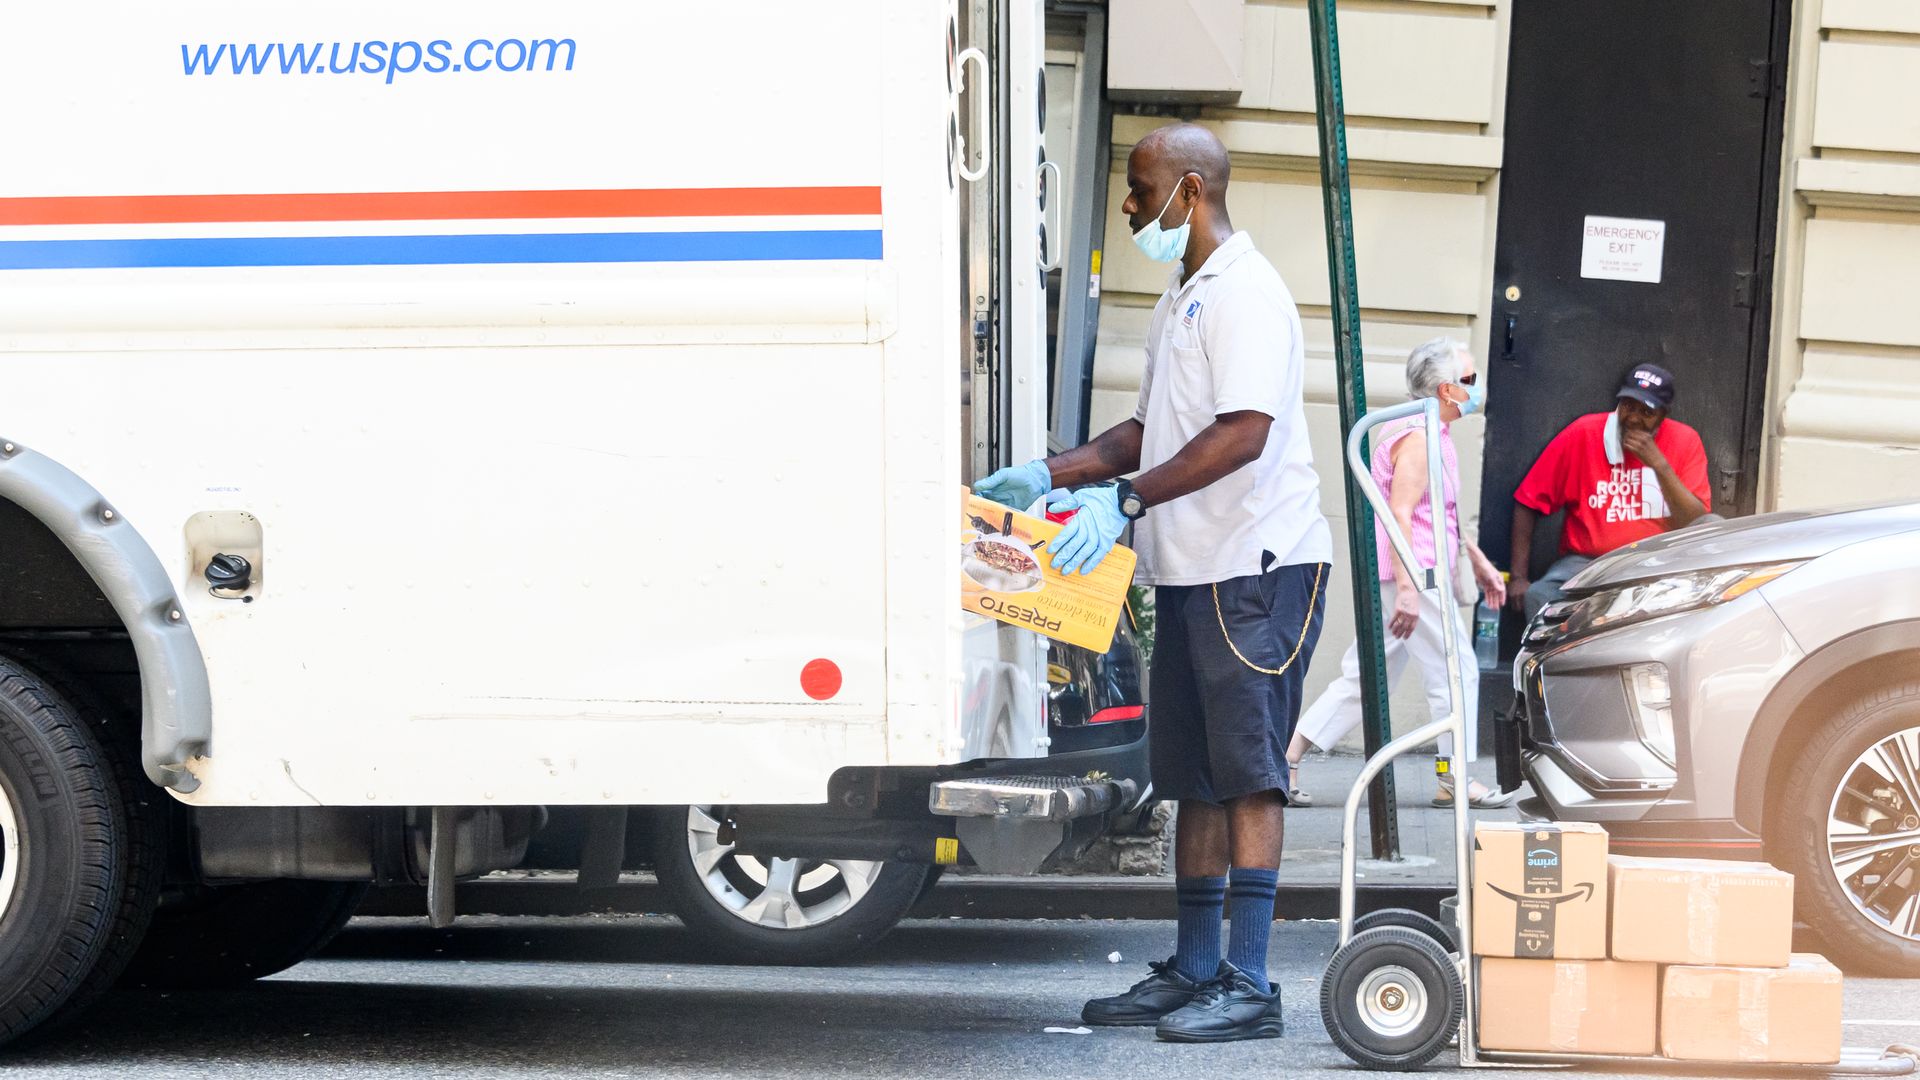 A USPS van and worker